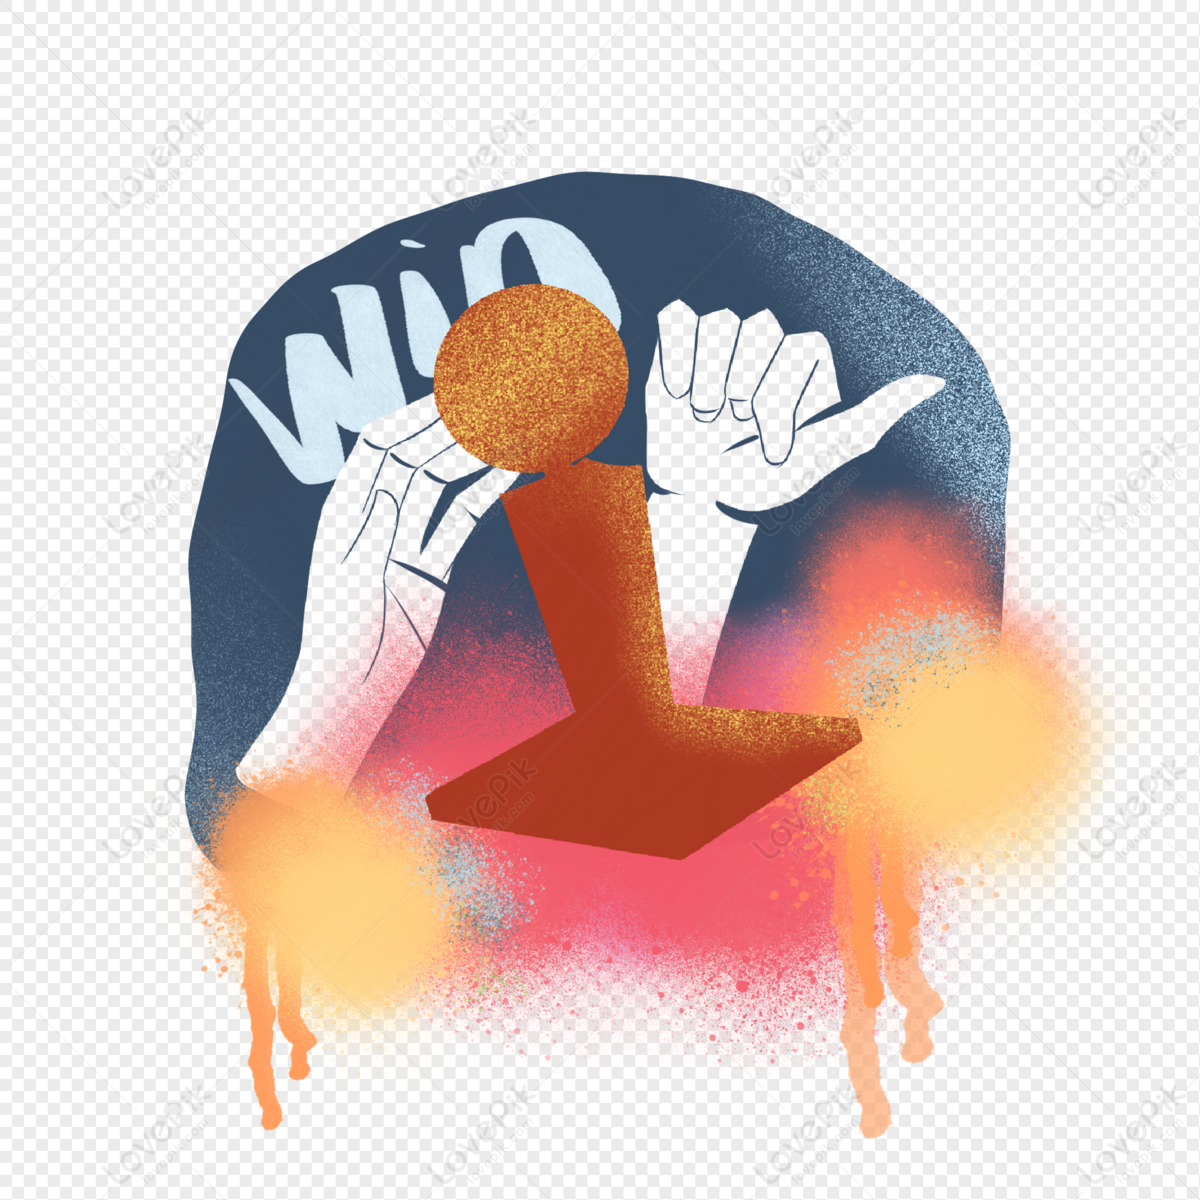 Free Victory Gesture Hand Drawn Stick Figure Material, Material, Victory,  Hand Painting PNG Image Free Download PNG & TIF image download - Lovepik